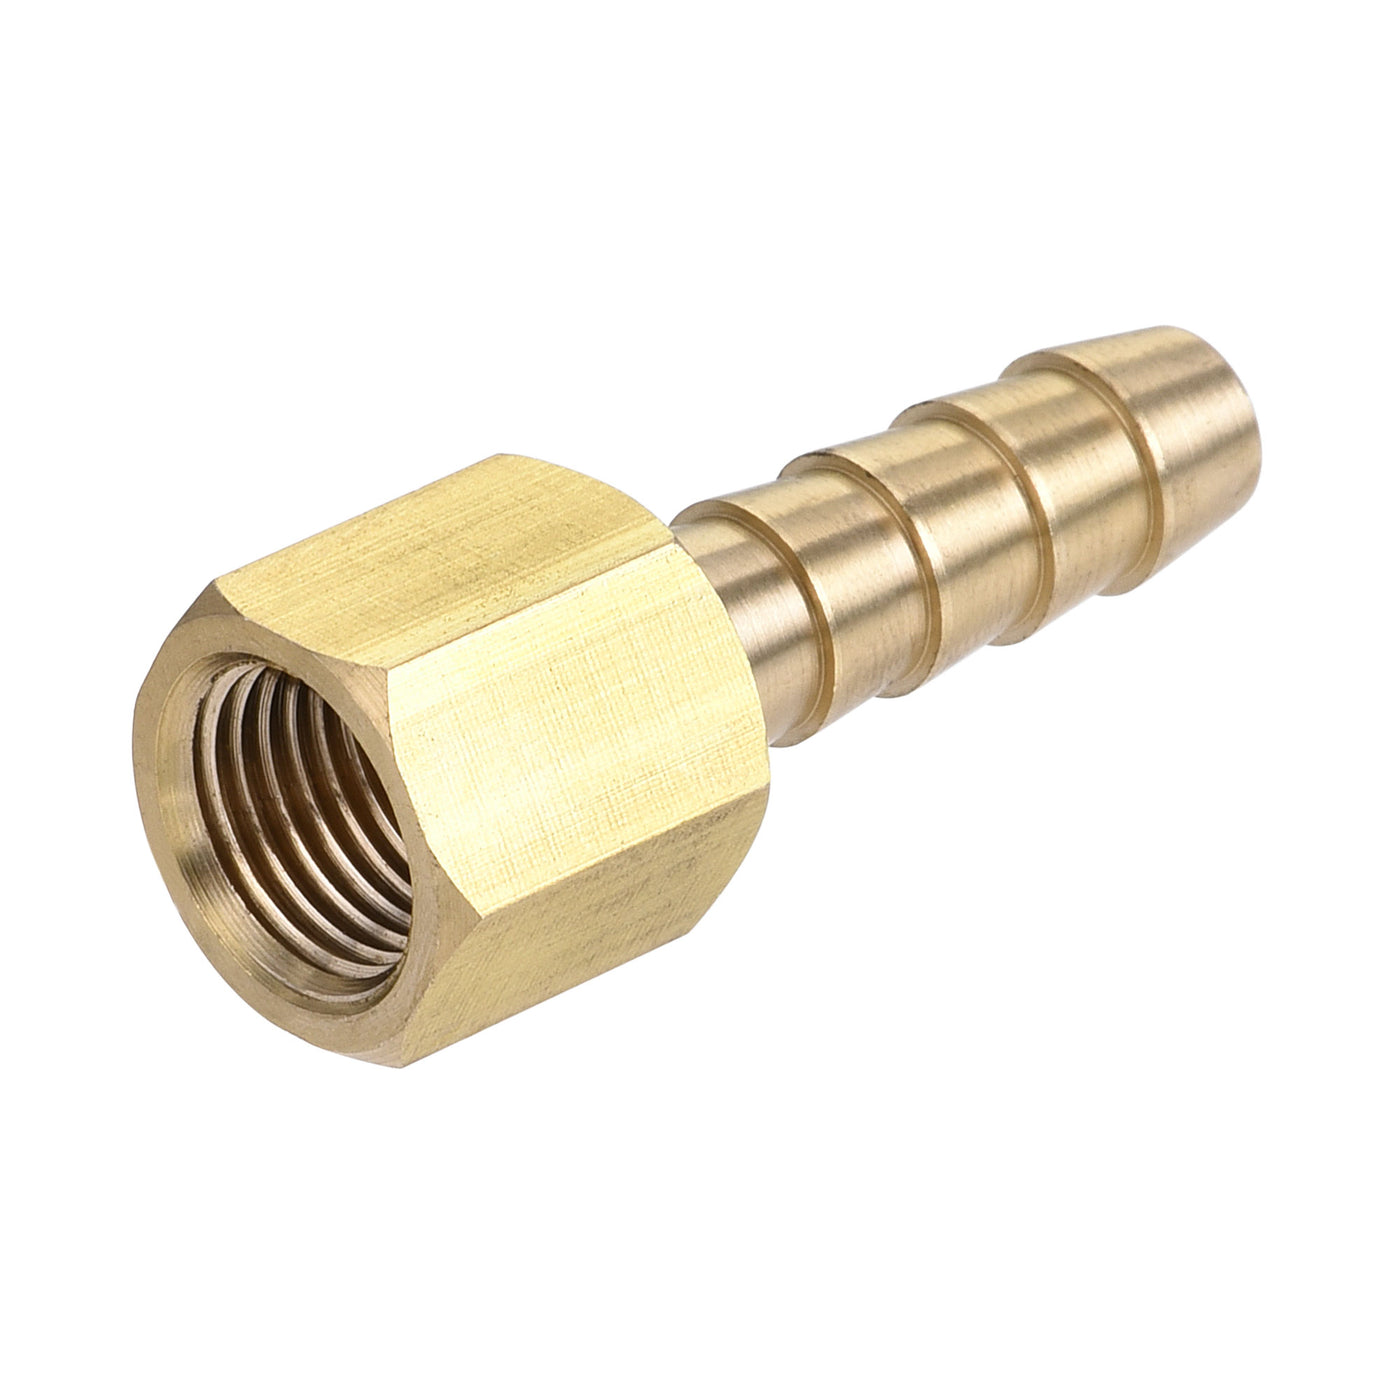 Uxcell Uxcell Brass Barb Hose Fitting Connector Adapter 3/16 Barbed x 1/8NPT Female Pipe 2pcs